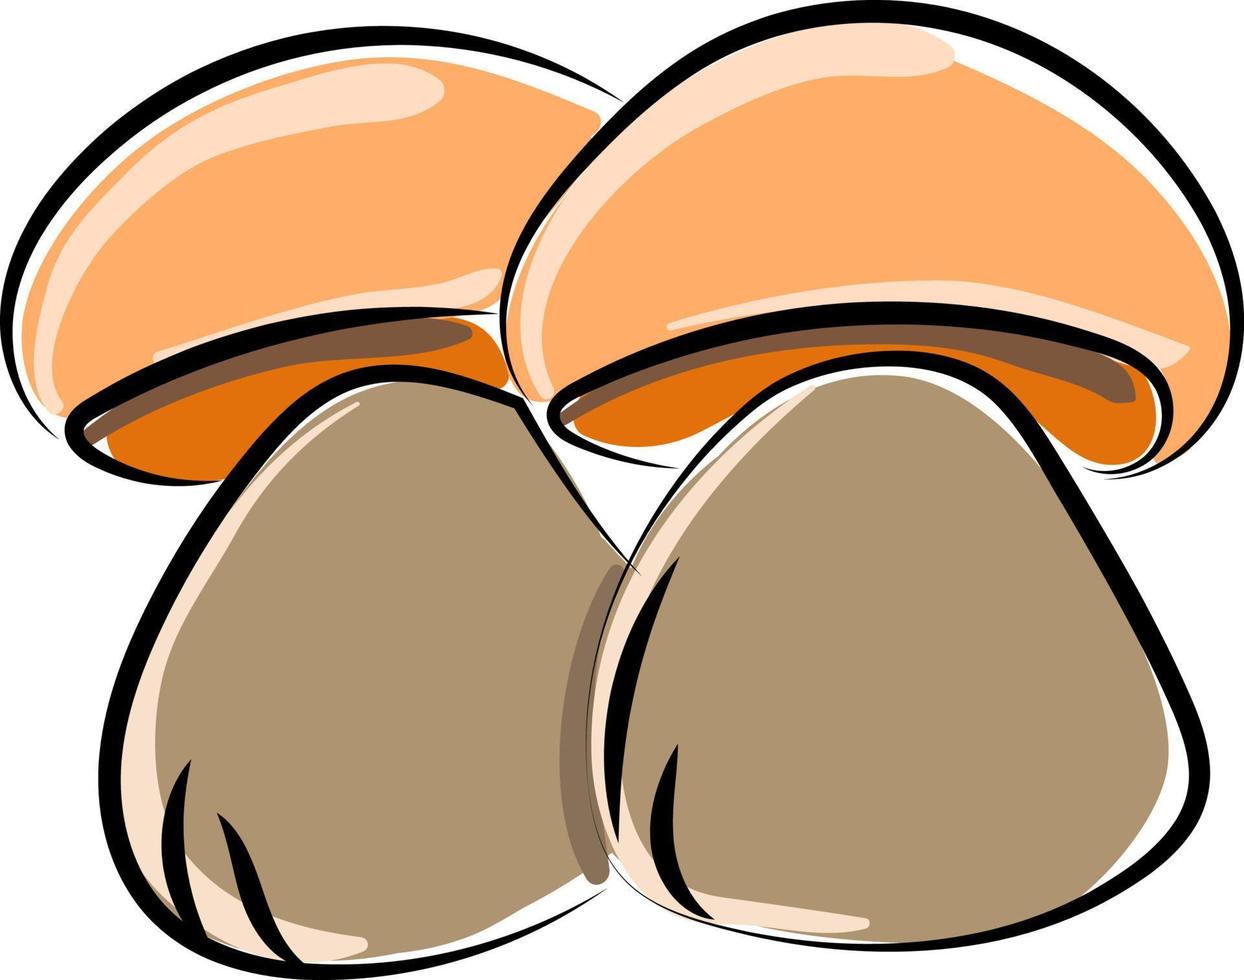 Two brown mushrooms, illustration, vector on white background.